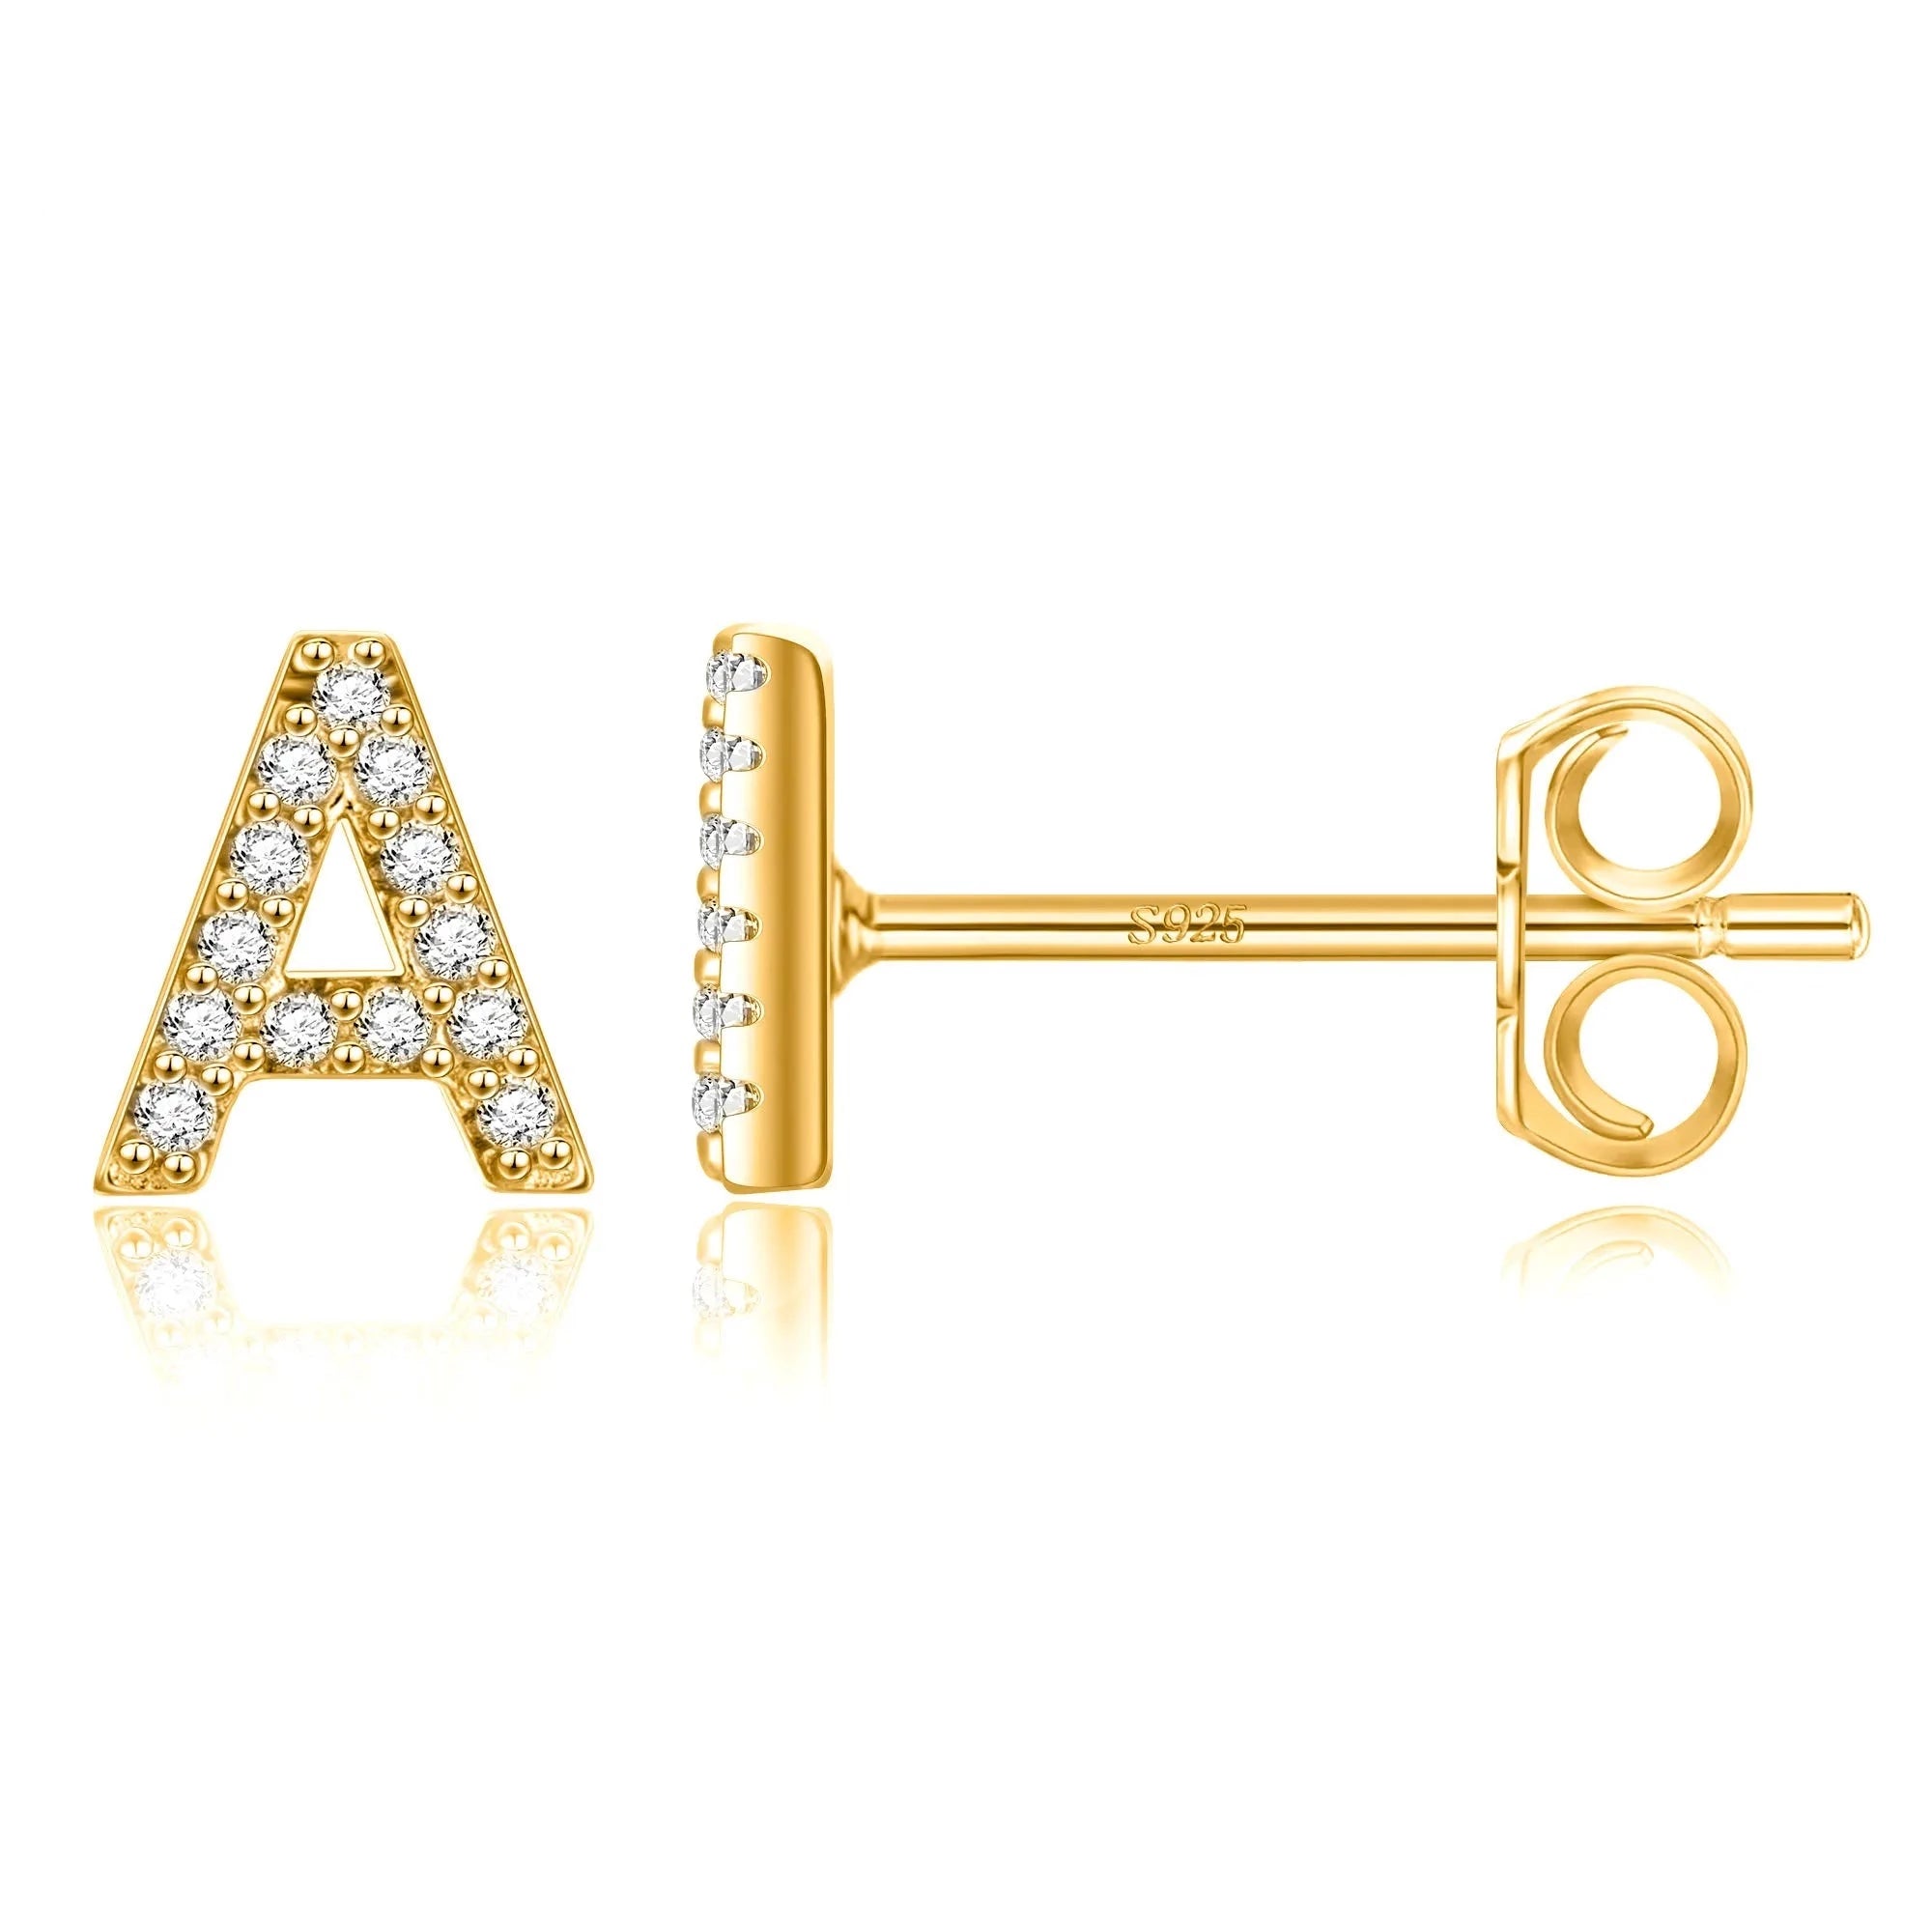 Personalized Elegance: Initial A-Z Letters Small Stud Earrings - A Subtle Expression of Individuality and Style!